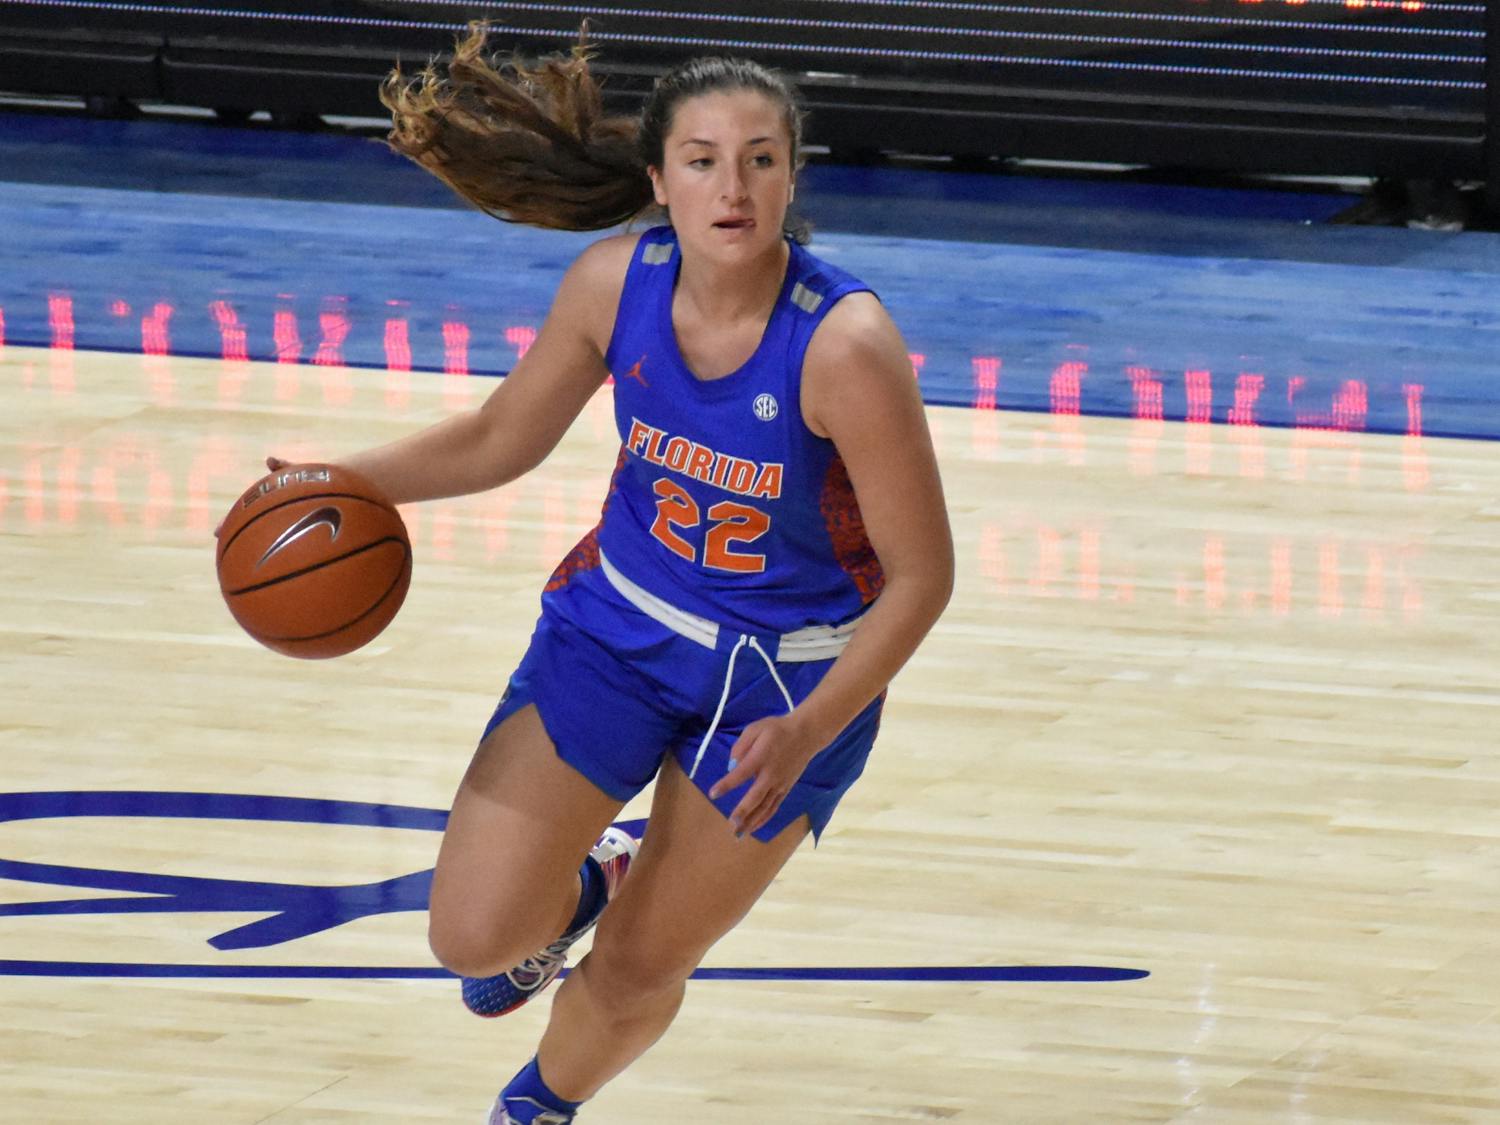 Florida's Brynn Farrell photographed during a game against Alabama on Feb. 18.